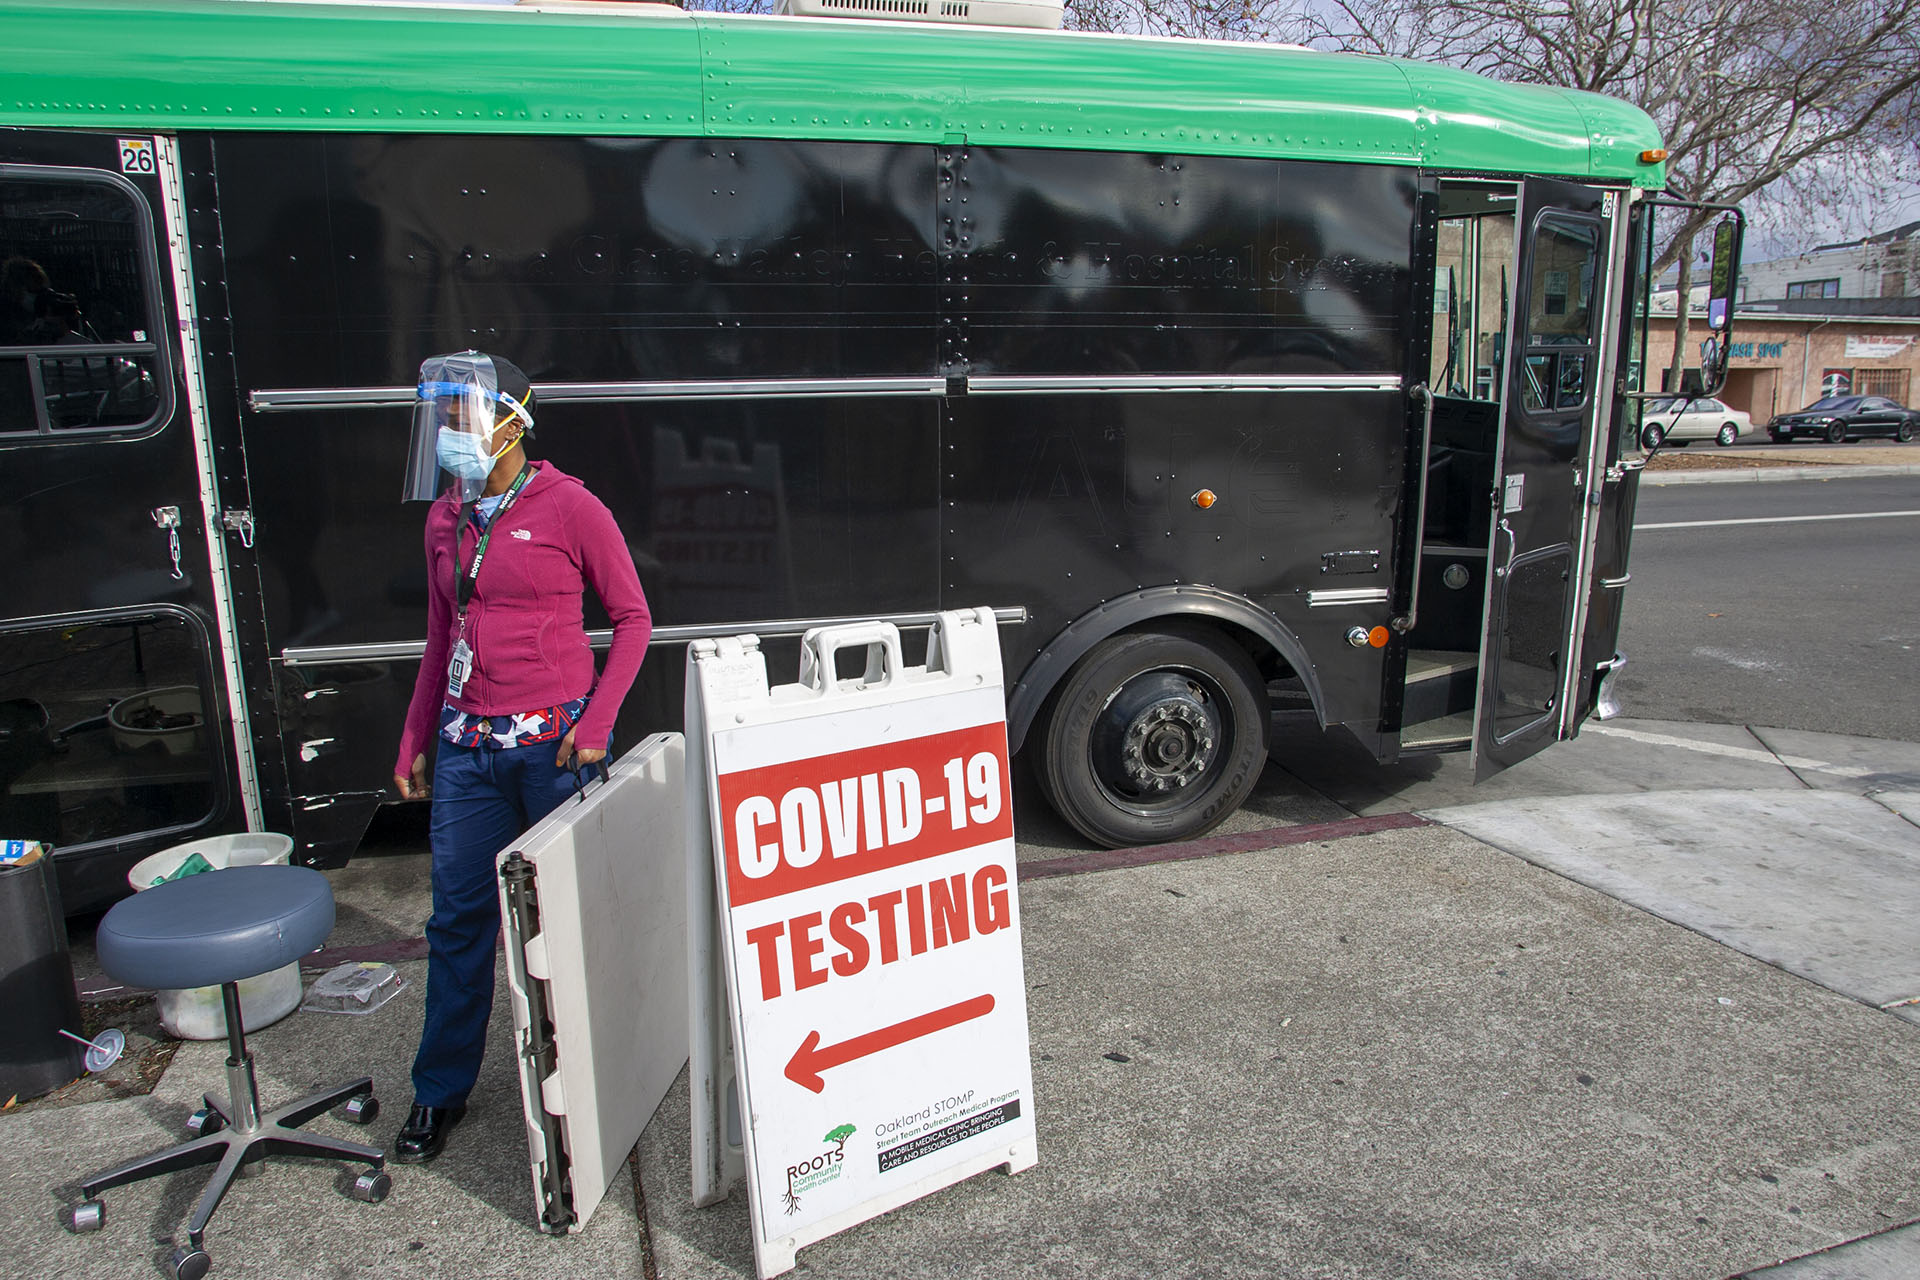 Maggie McNair, RN, of Roots Community Health Center, sets up a COVID-19 testing station on the sidewalk in East Oakland near the organization's mobile health clinic bus.